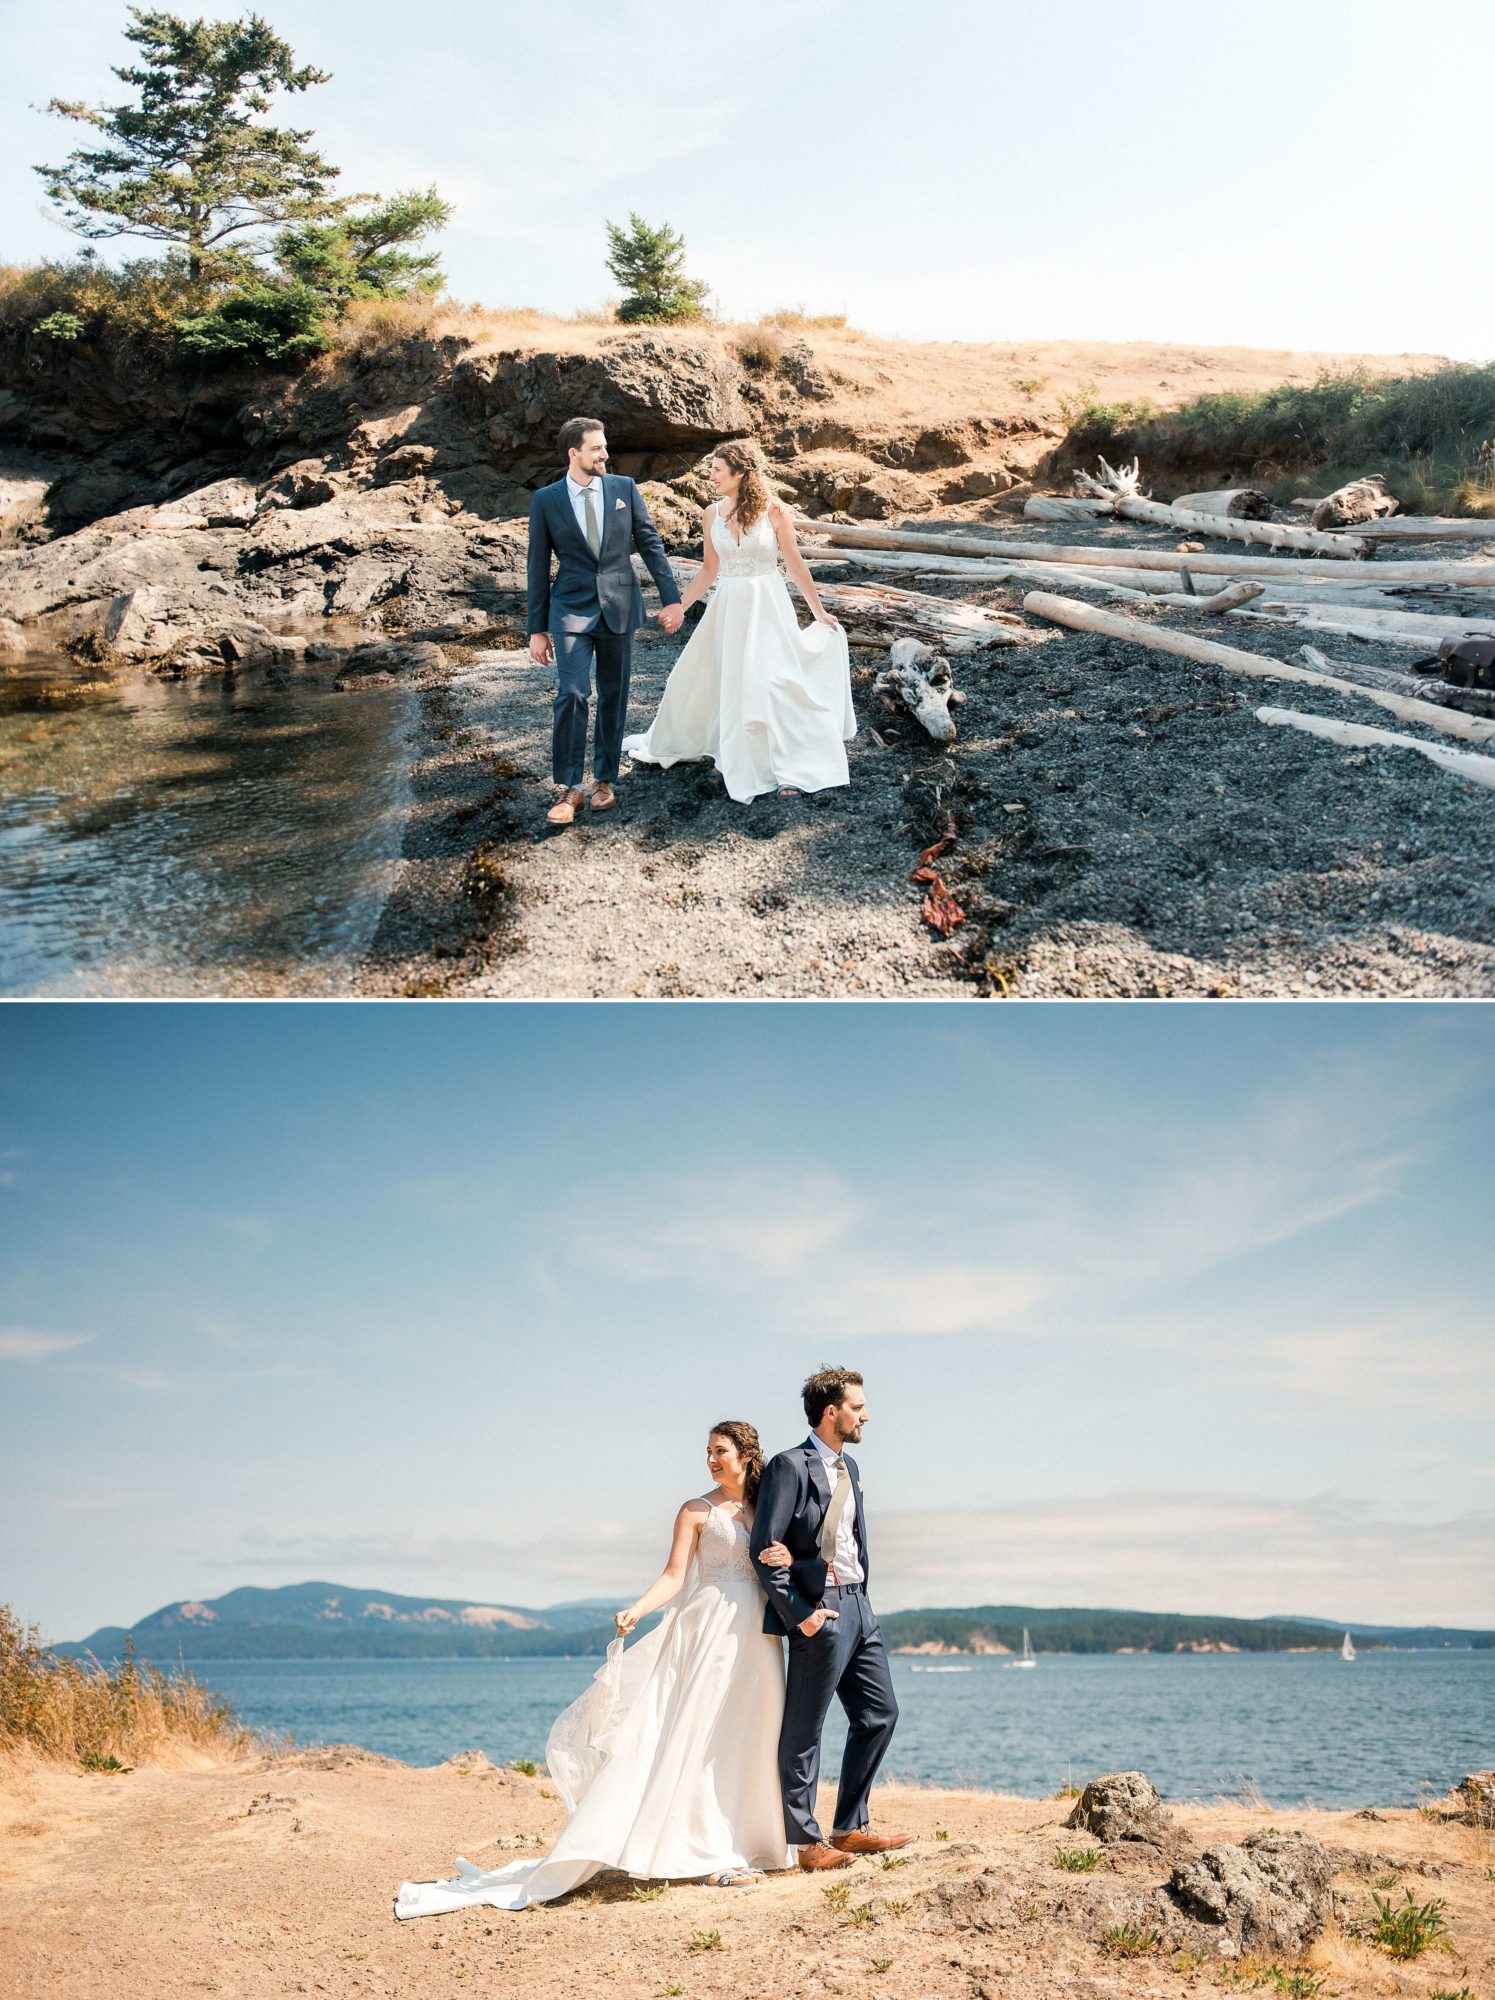 Bride and groom on the beach in the san juan islands